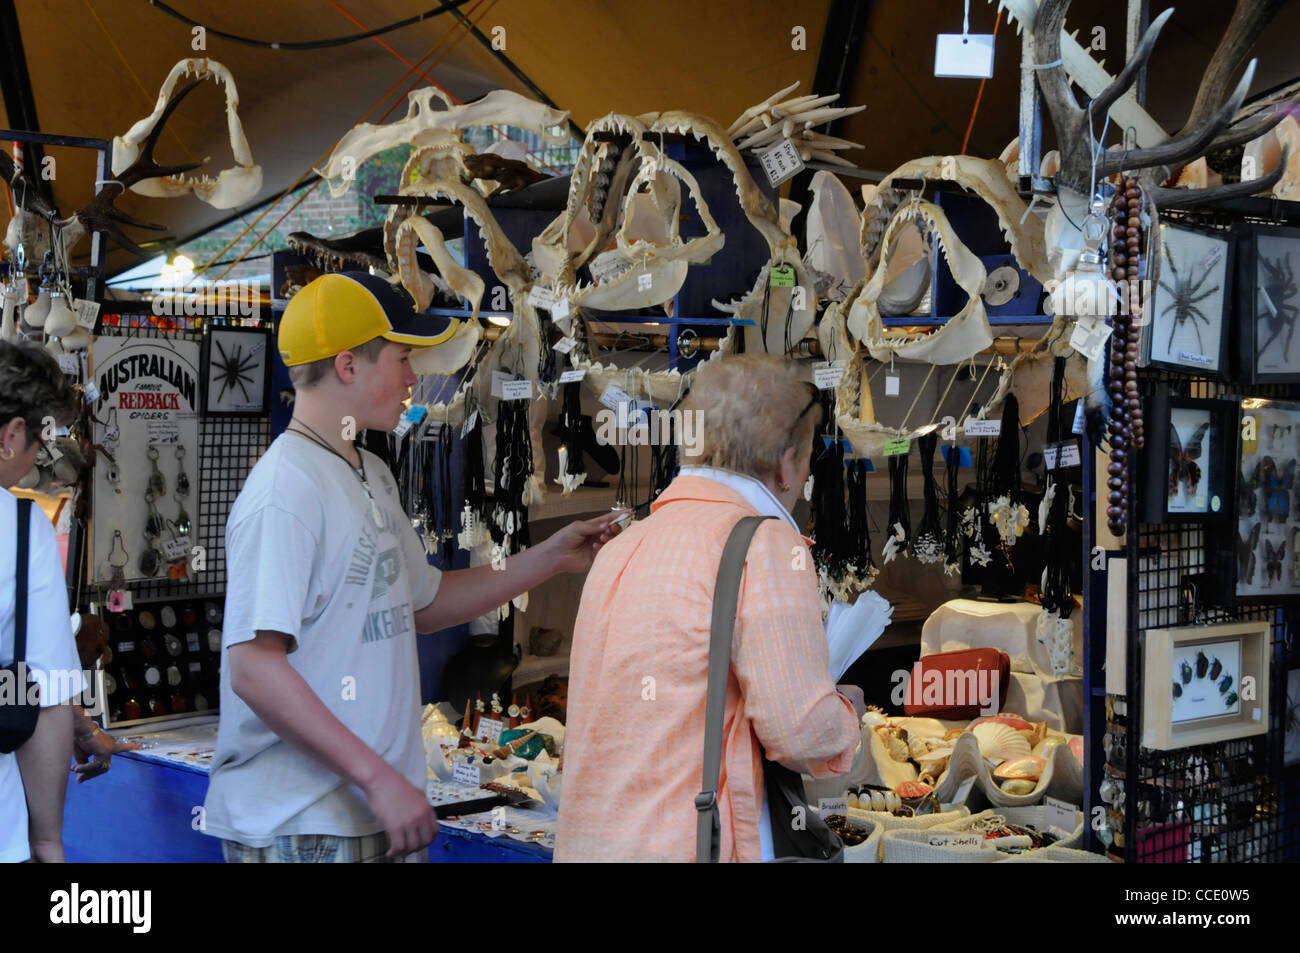 Visitors admiring a selection of seashells at a stall on Market day at The Rocks in Sydney, Australia Stock Photo